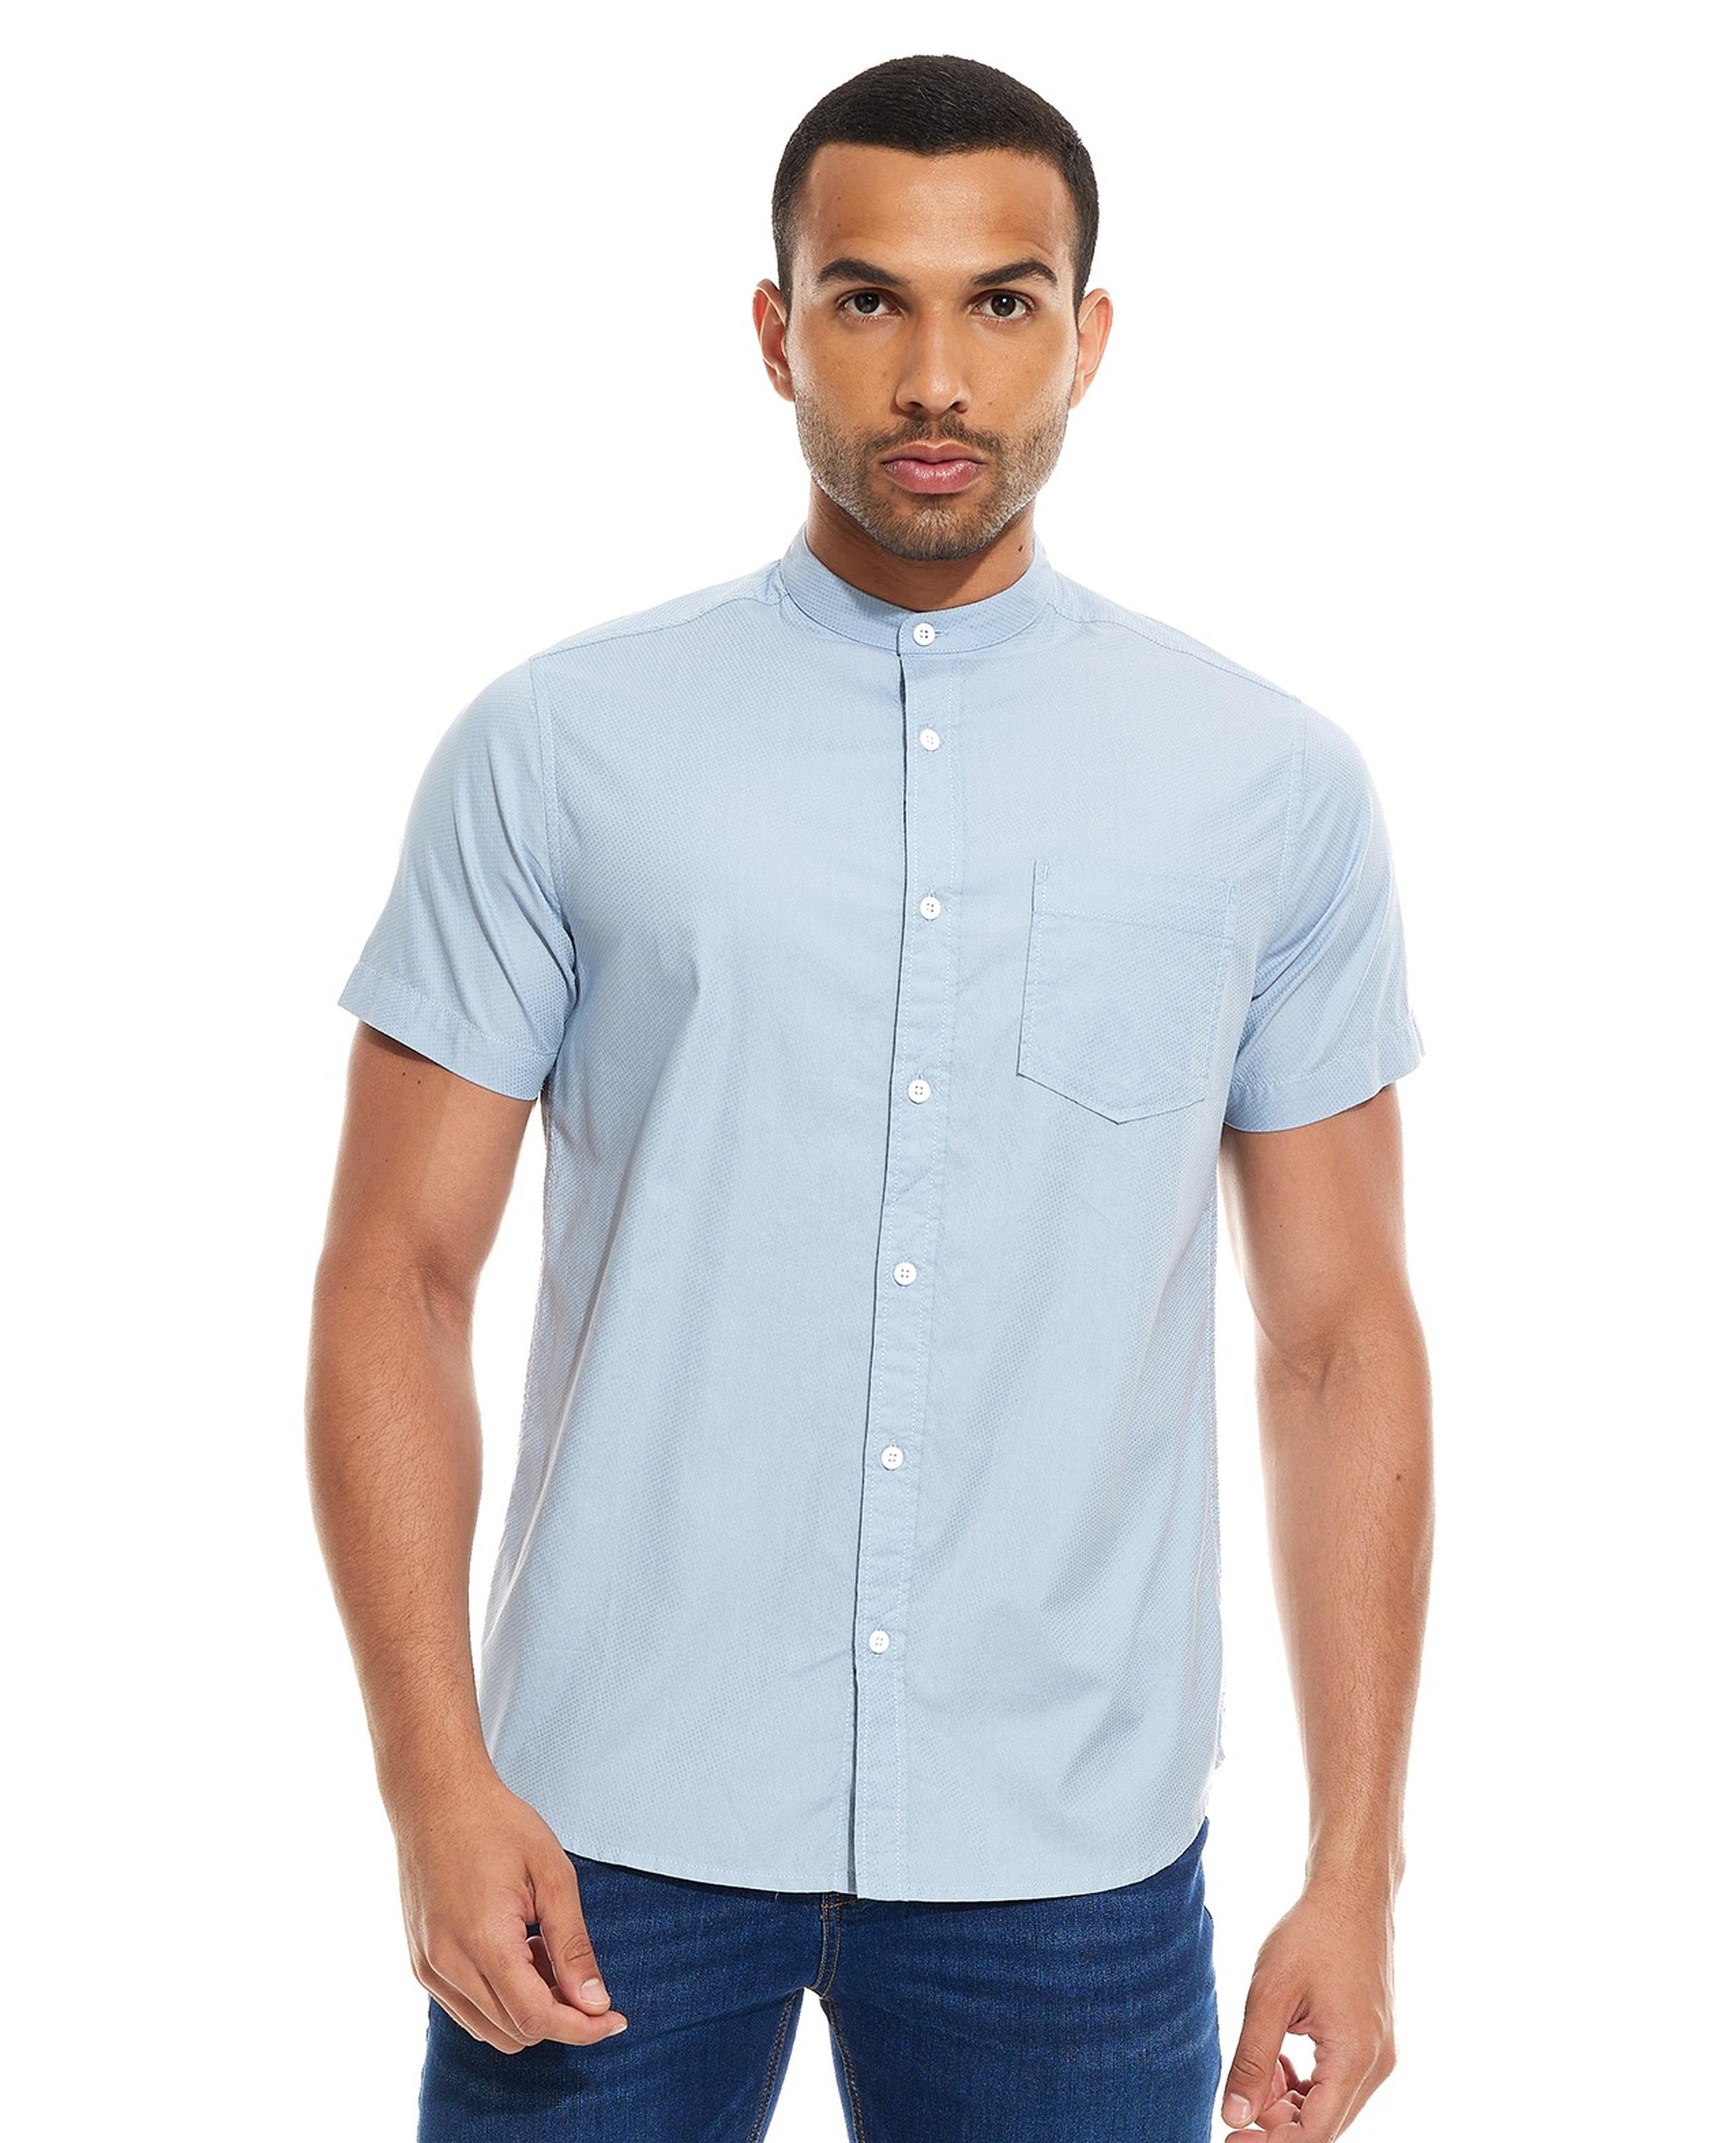 Solid Shirt with Stand Collar and Short Sleeves